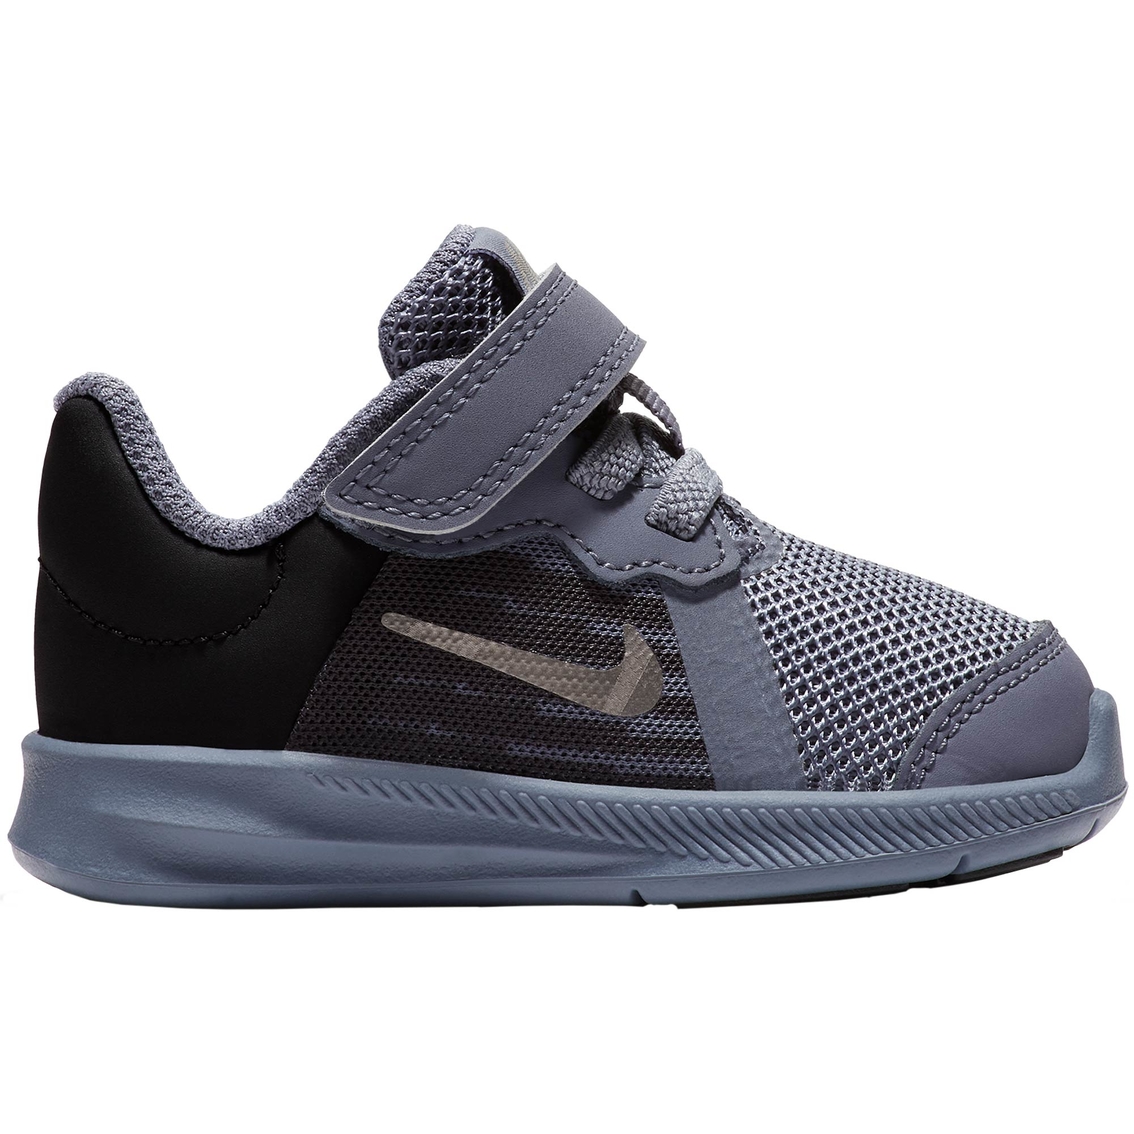 Nike Toddler Boys Downshifter 8 Running Shoes | Sneakers | Shoes | Shop ...